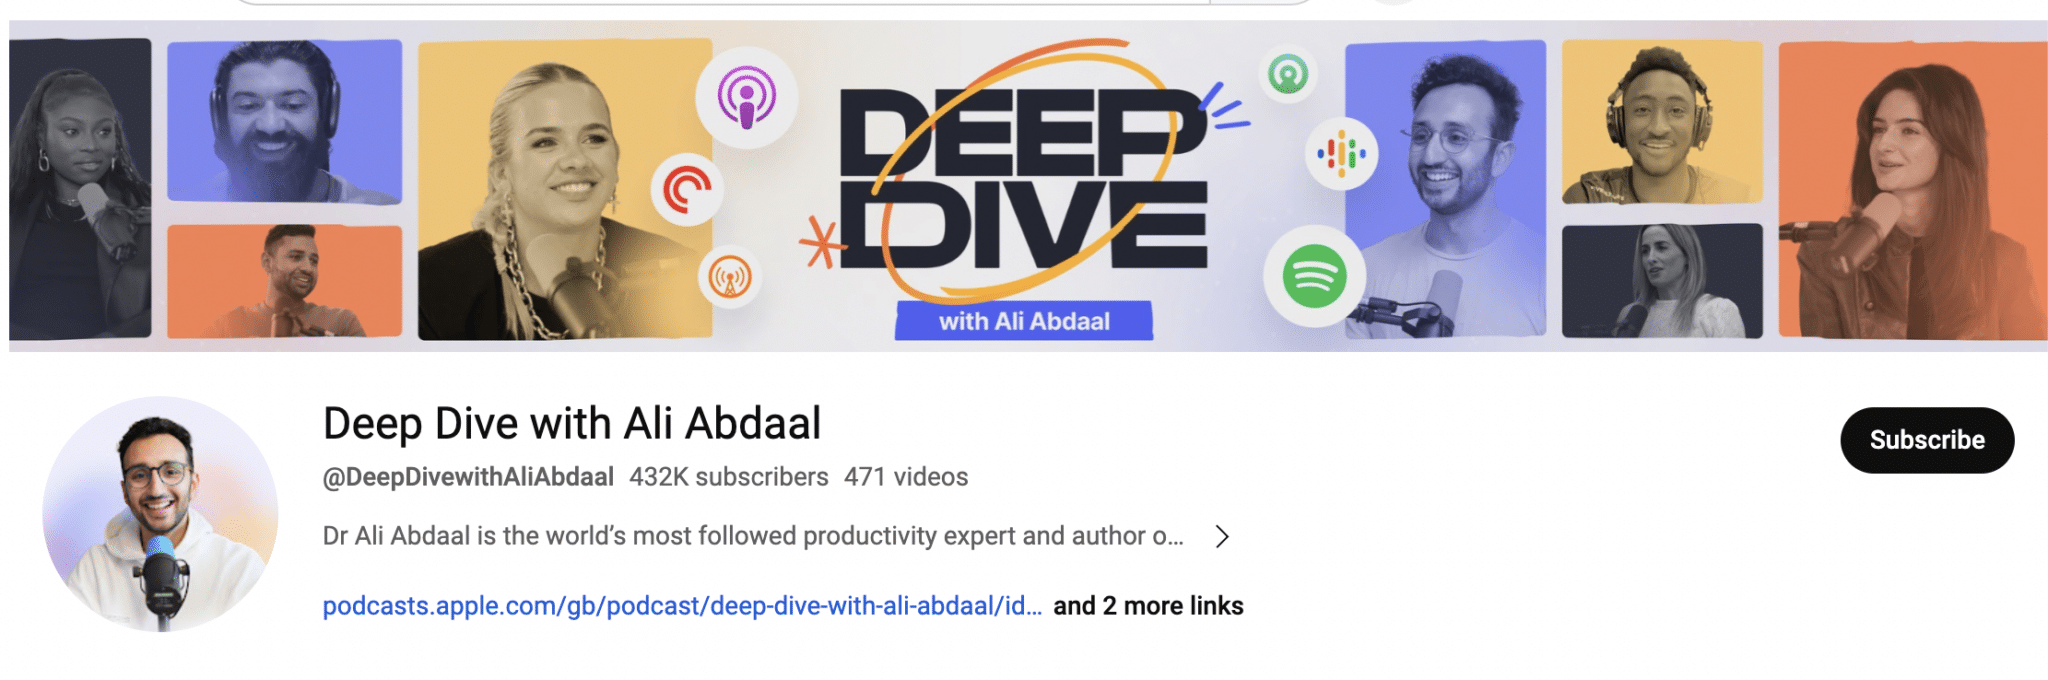 Deep Dive with Ali Abdaal channel banner